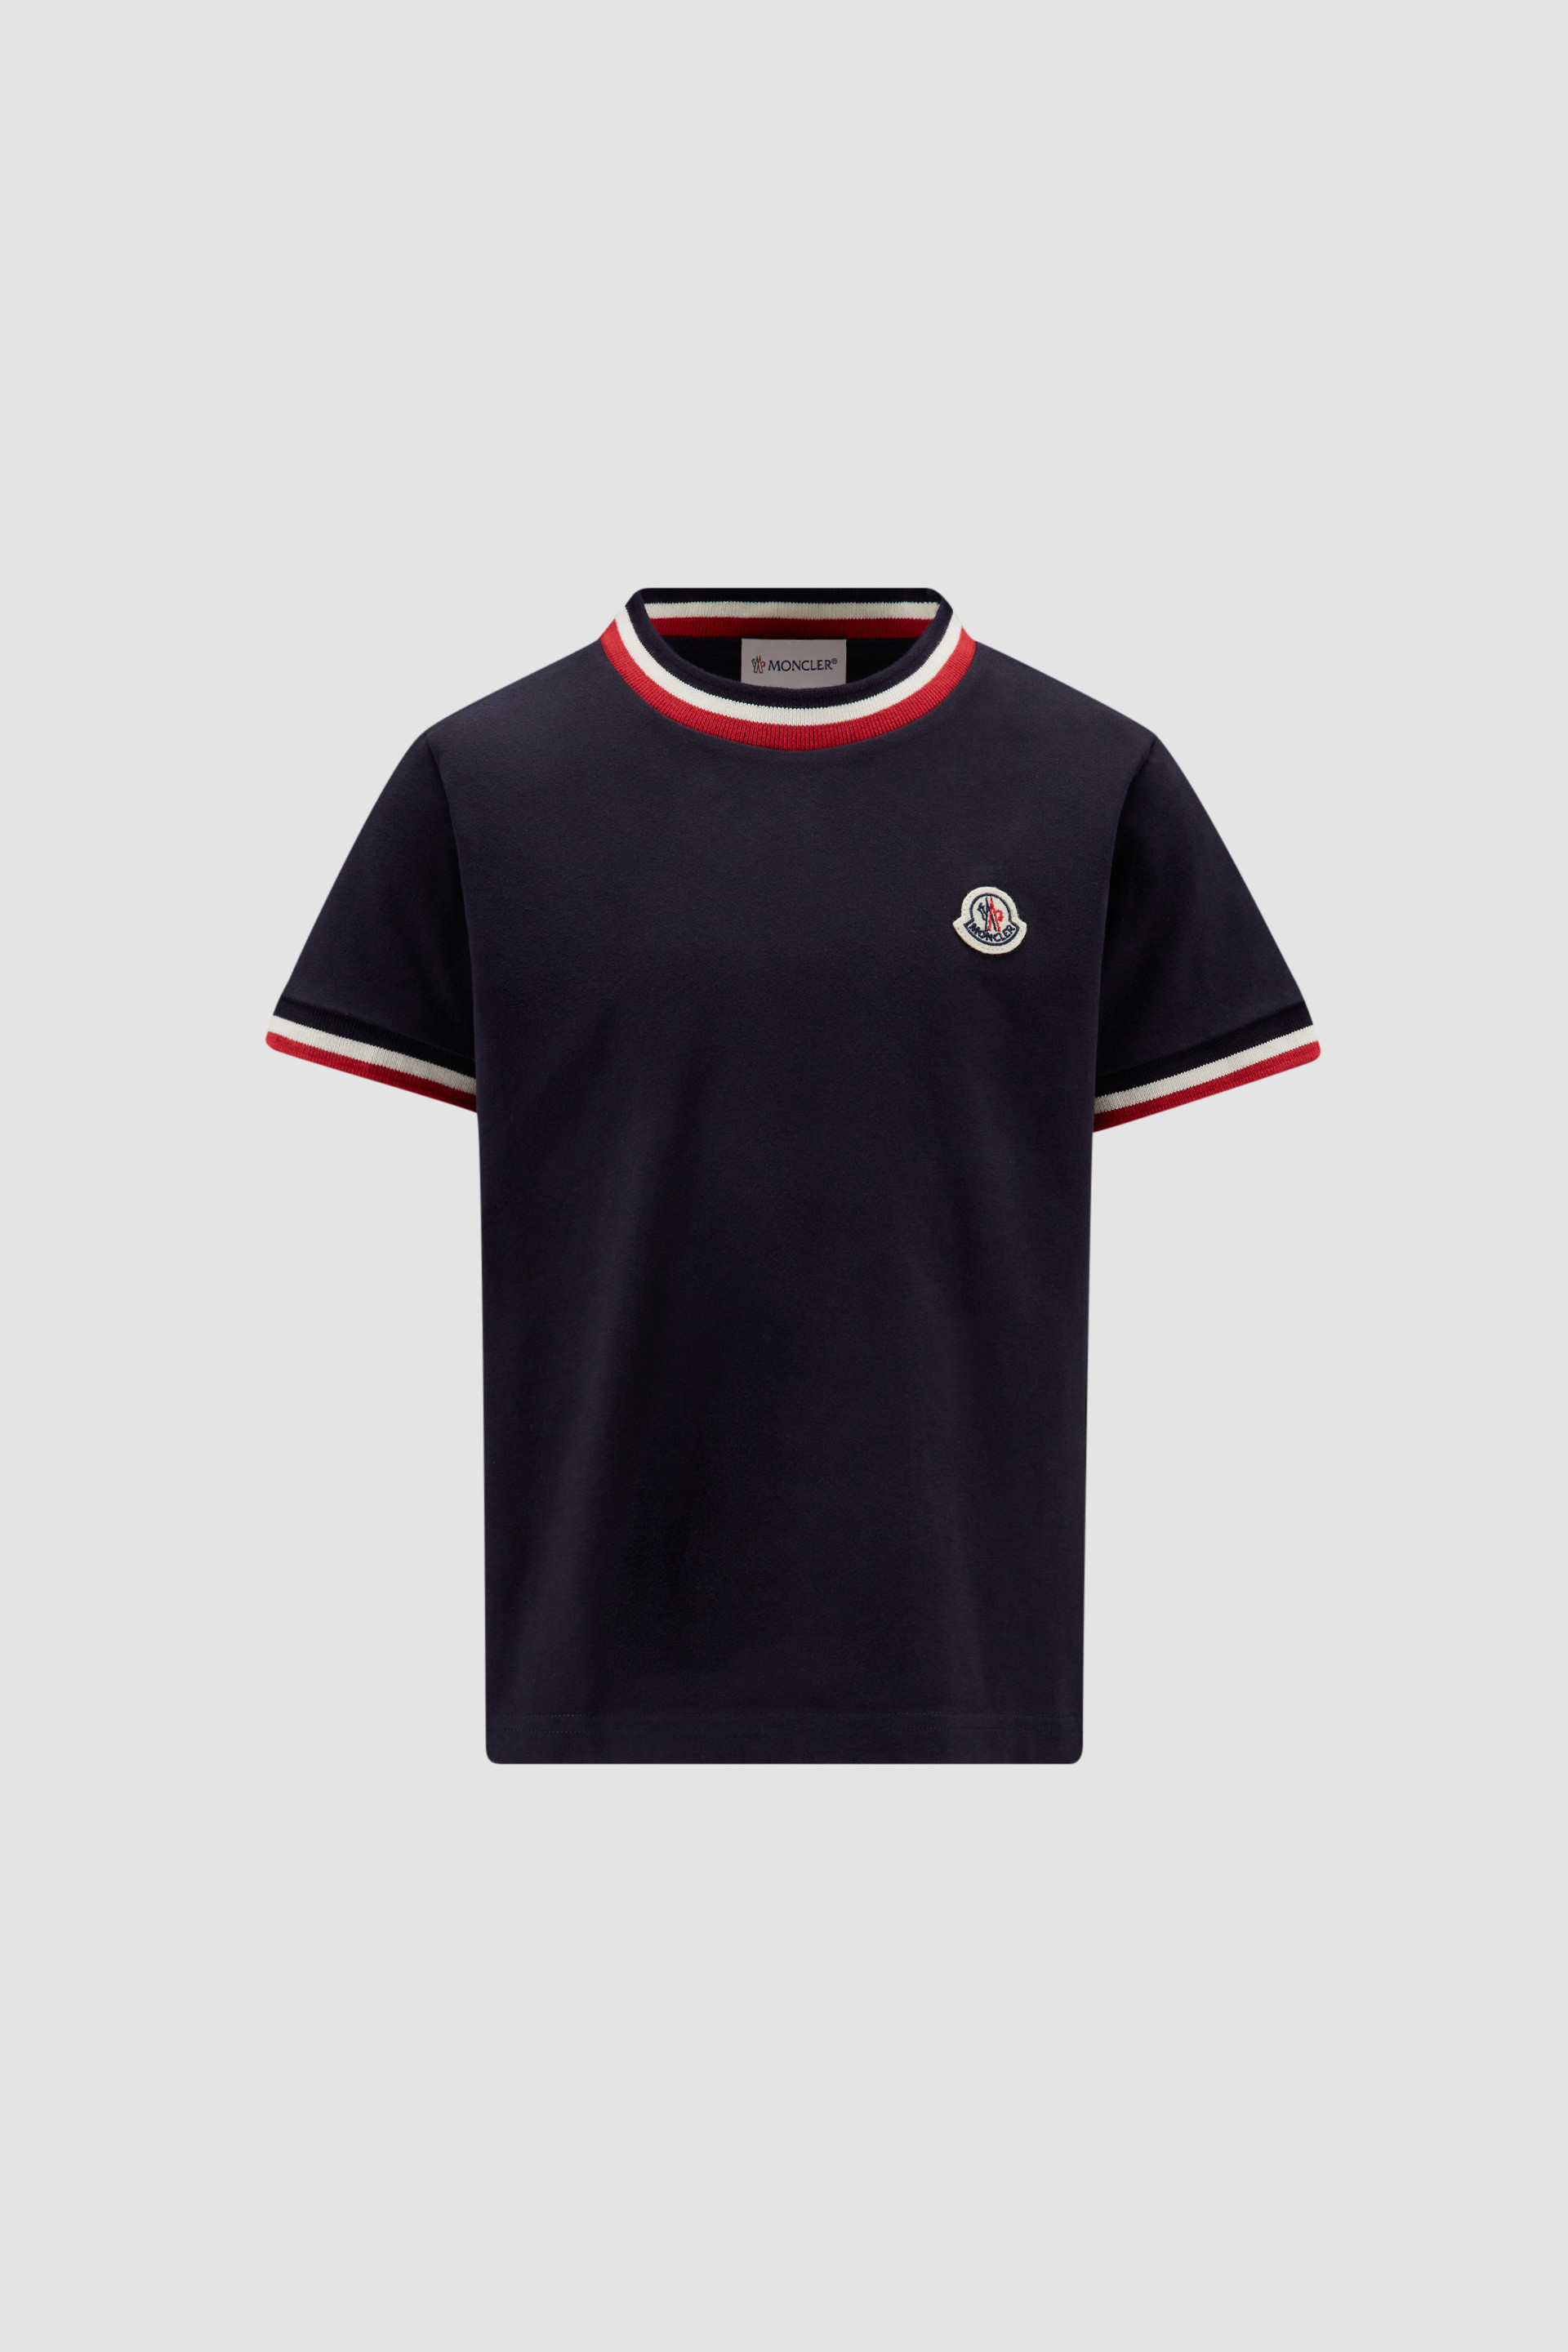 Moncler Boy's Embroidered Monogram T-Shirt